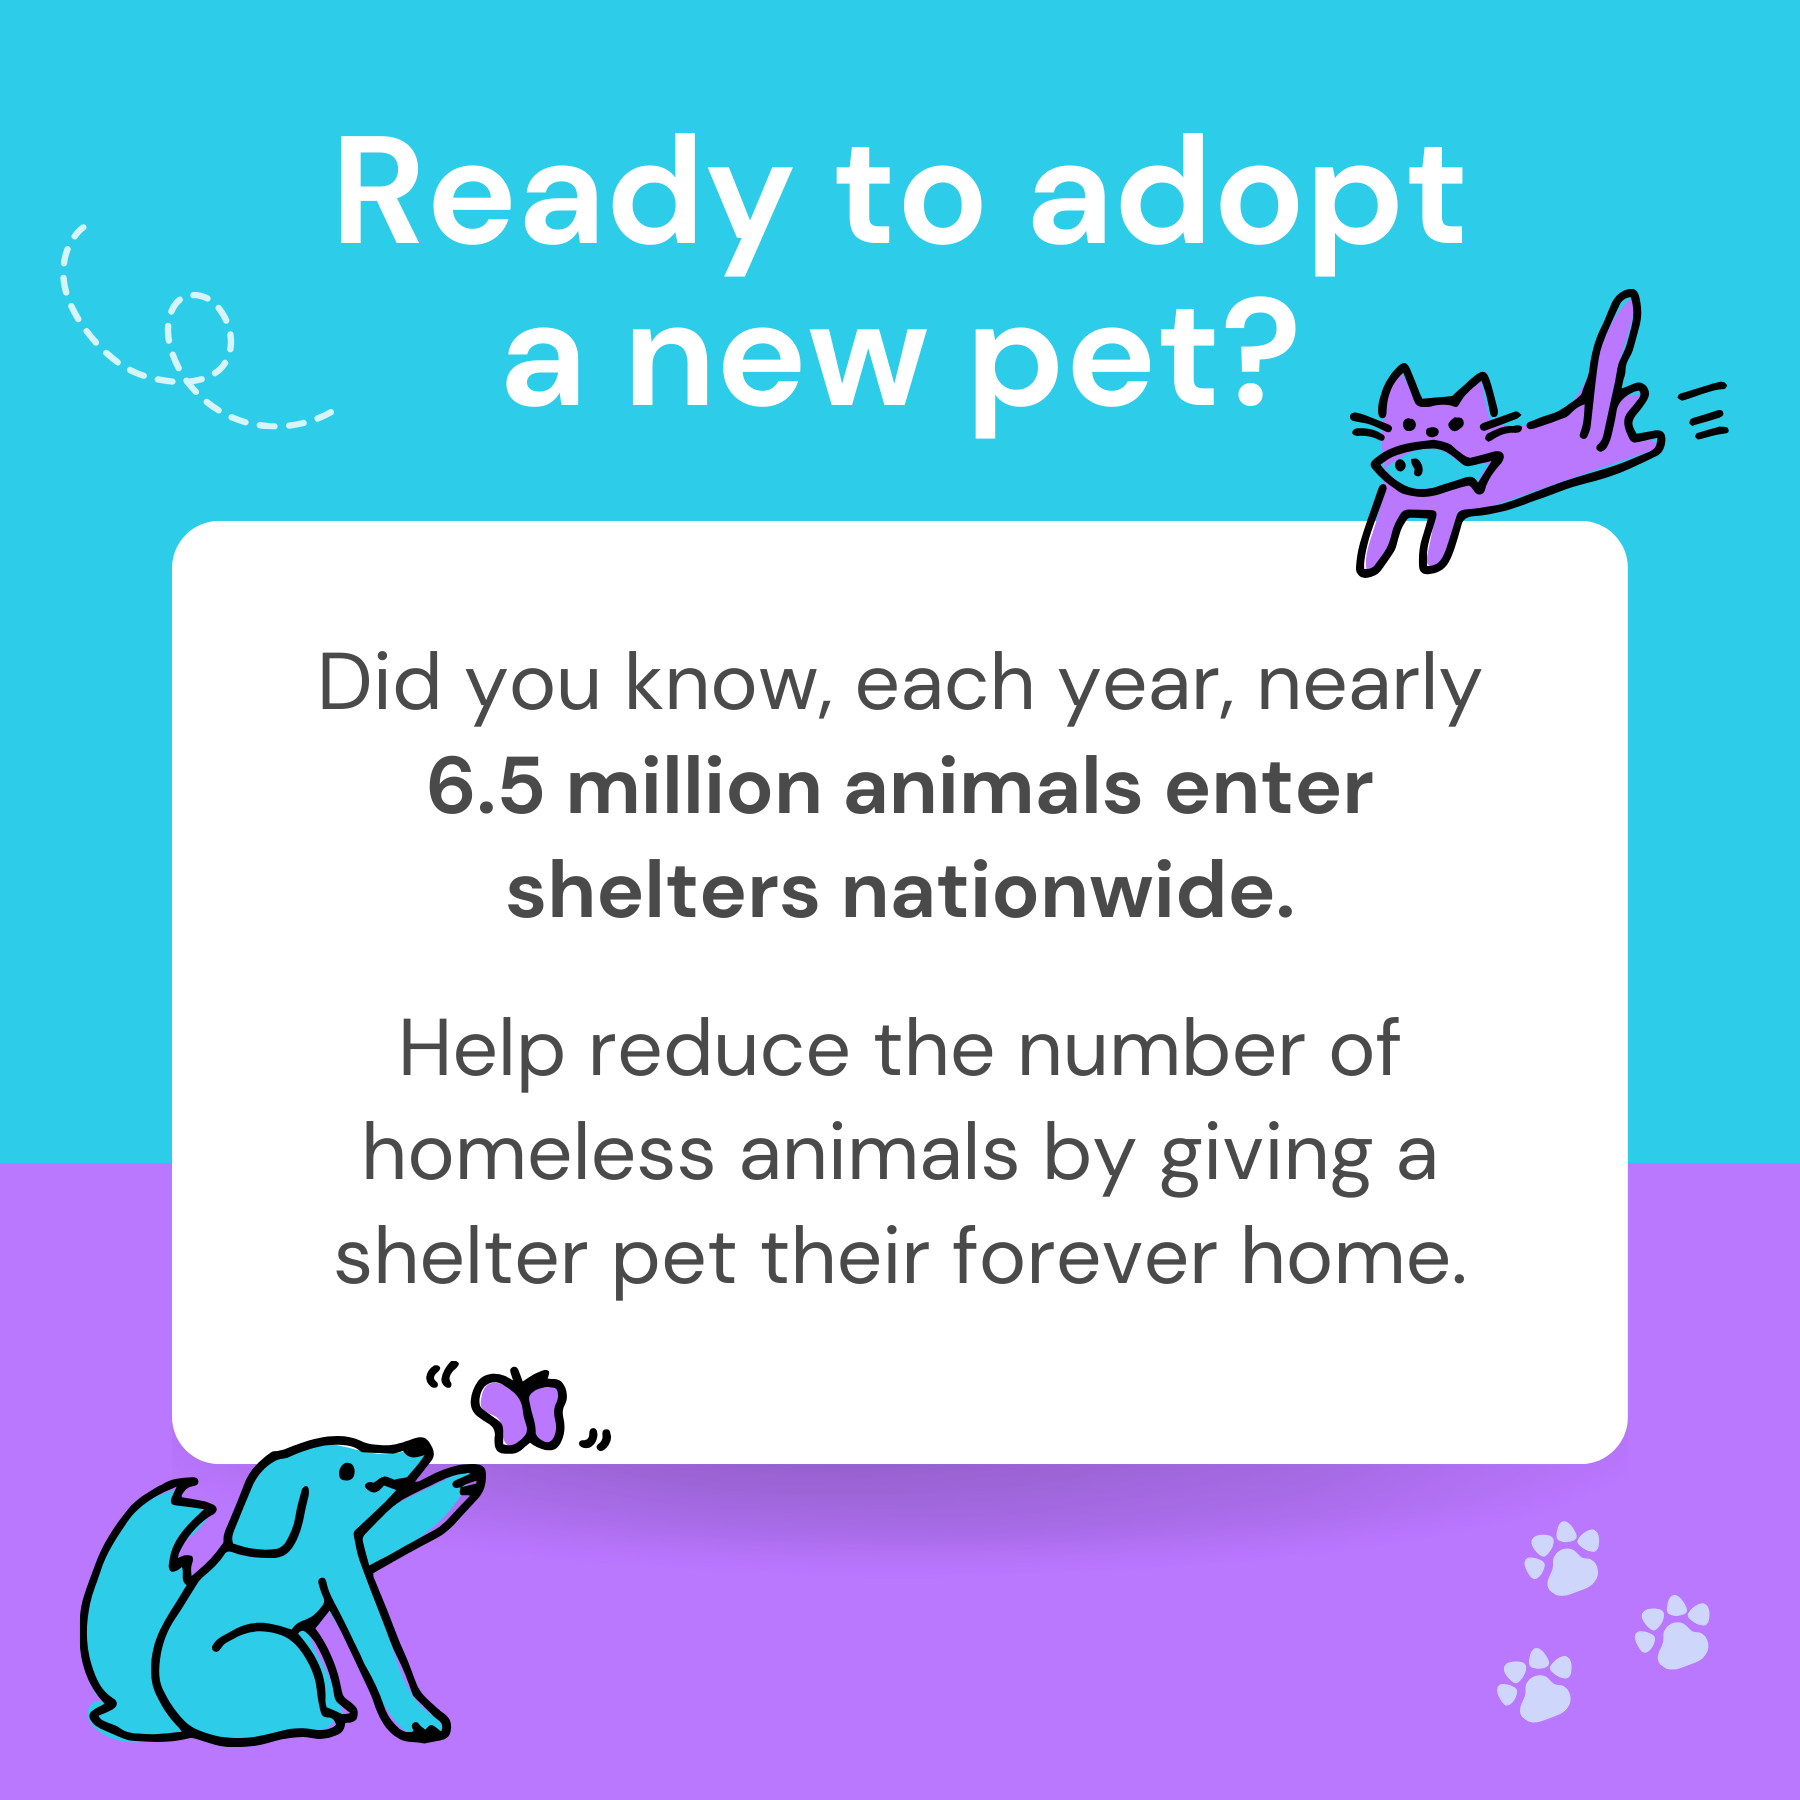 Ready to Adopt a New Pet?